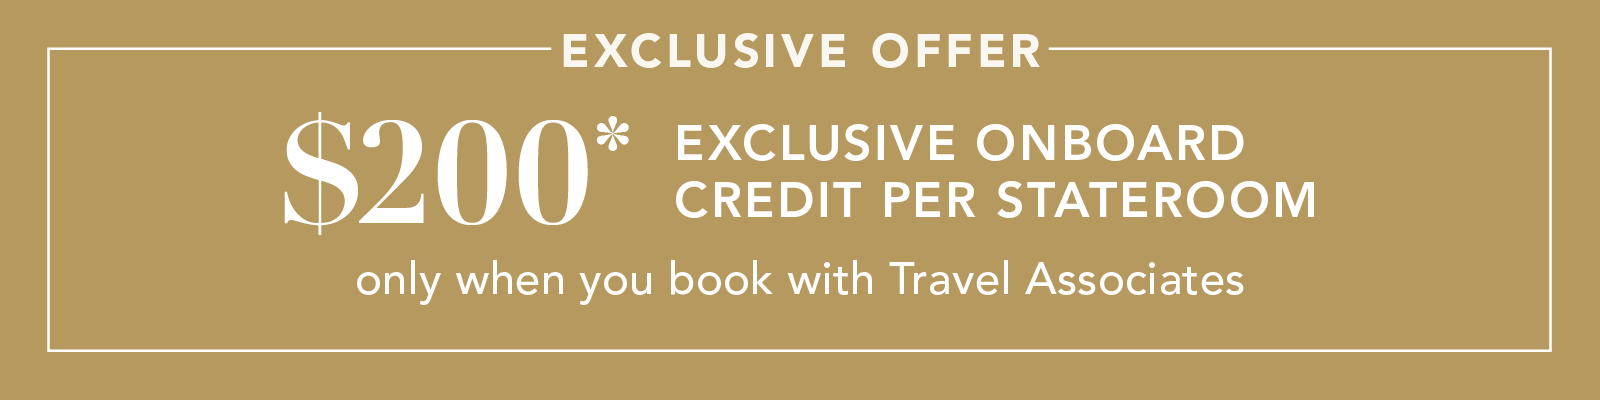 Exclusive offer $200* onboard credit per stateroom when you book with Travel Associates.